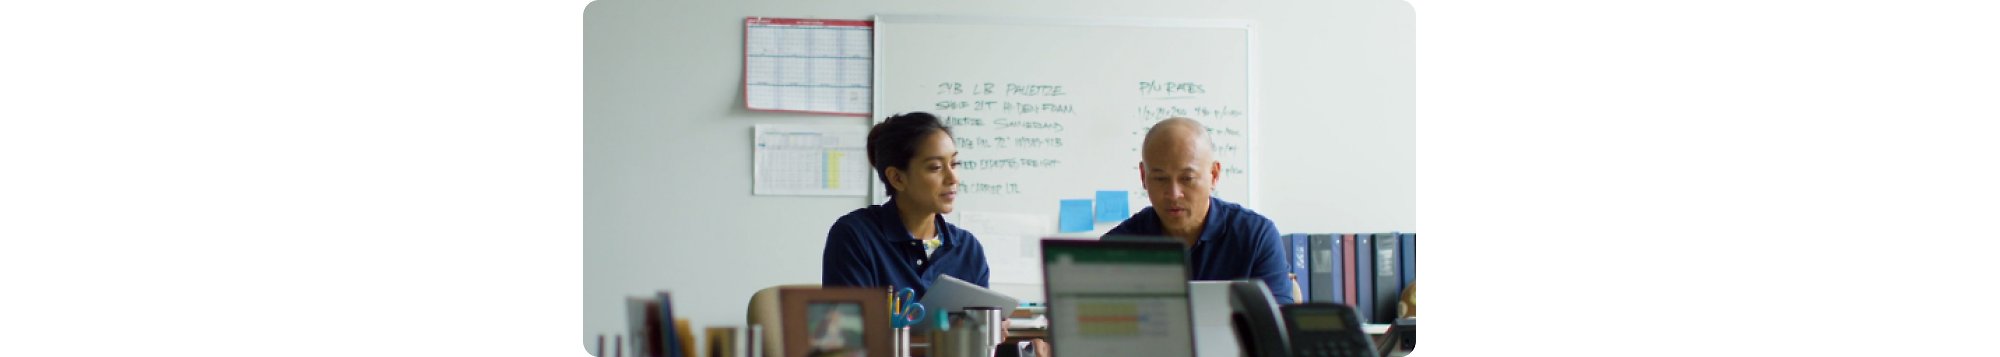 Two people sitting at a desk in front of a whiteboard.